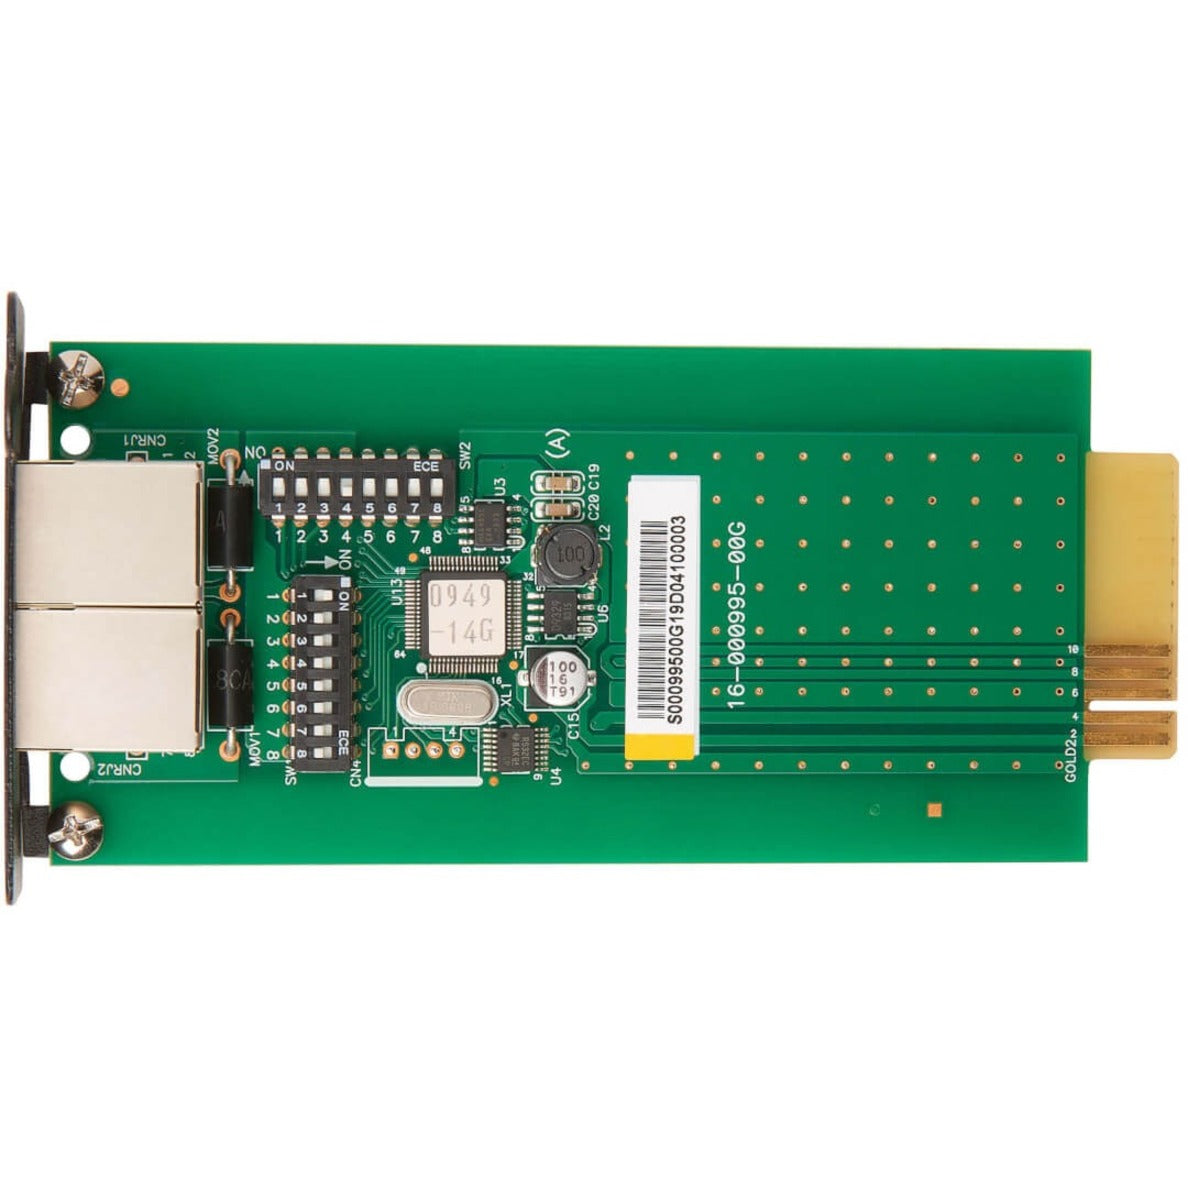 Tripp Lite MODBUSCARDSV Programmable RS-485 Management Accessory Card for Select 3-Phase UPS Systems, Monitoring & Control